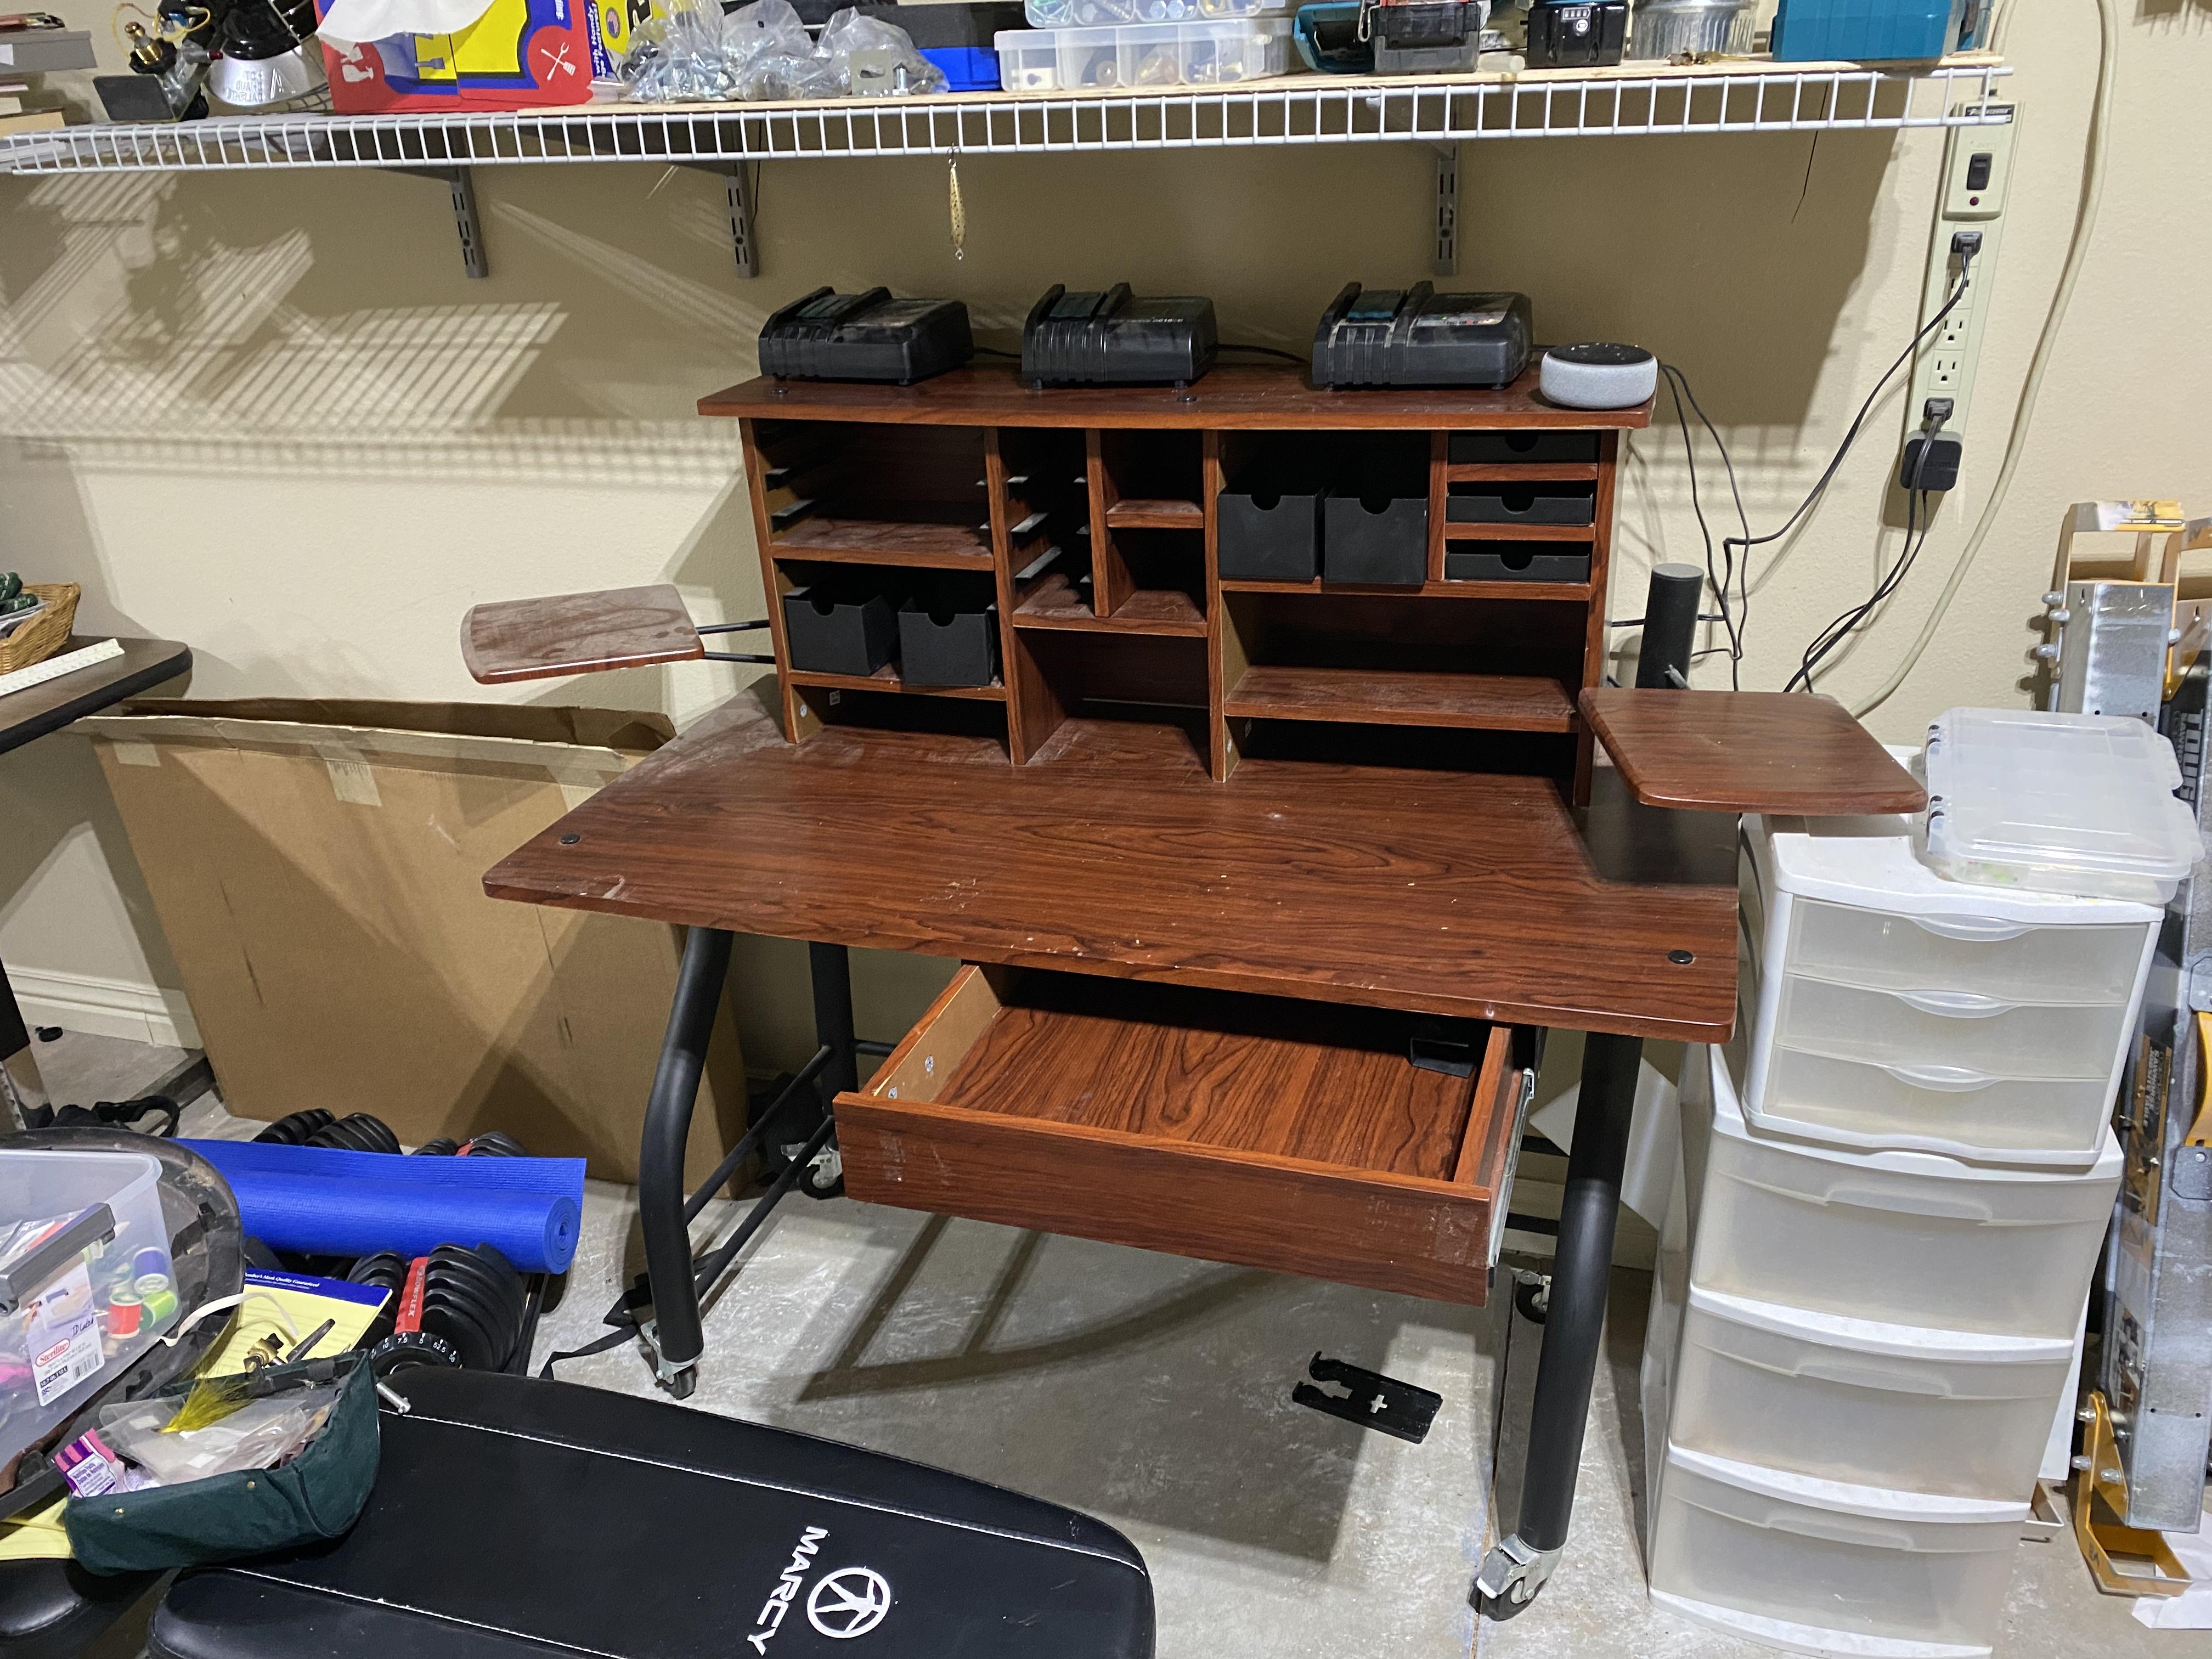 Fly Tying Desk $100 *available - Buy - Sell - Trade - OzarkAnglers